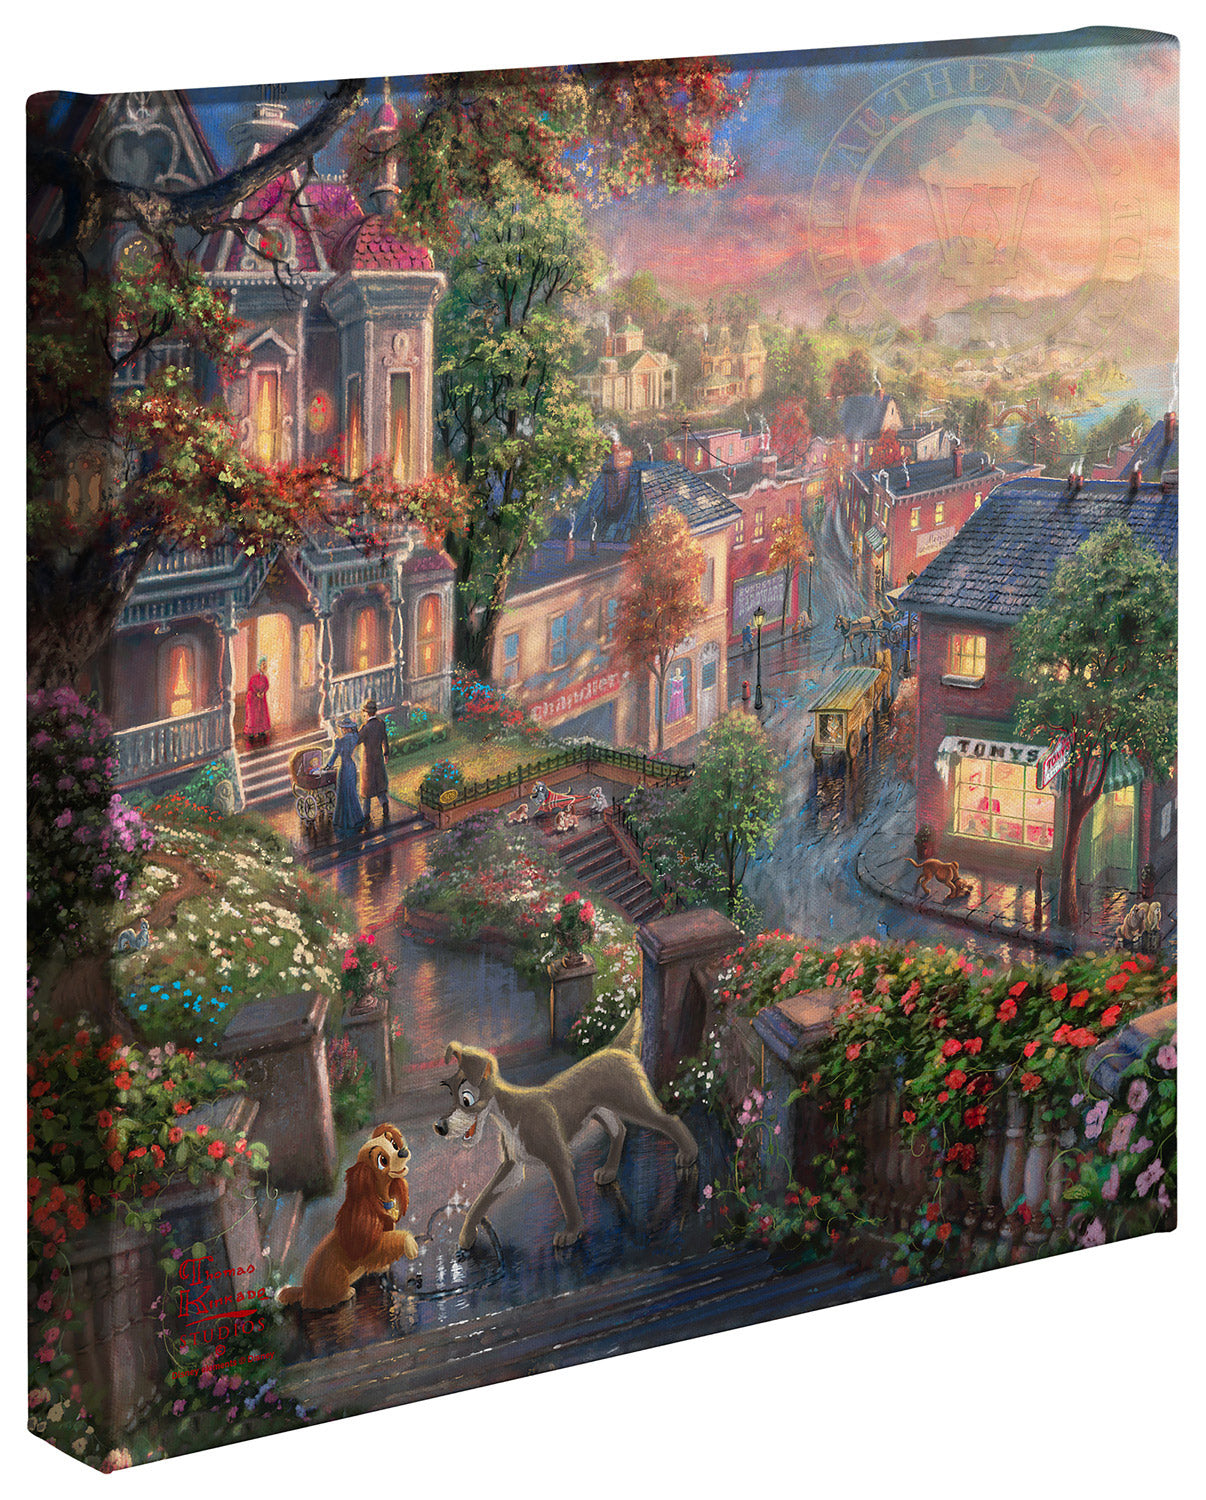 Thomas Kinkade Disney Dreams "Lady and the Tramp" Limited and Open Canvas Giclee